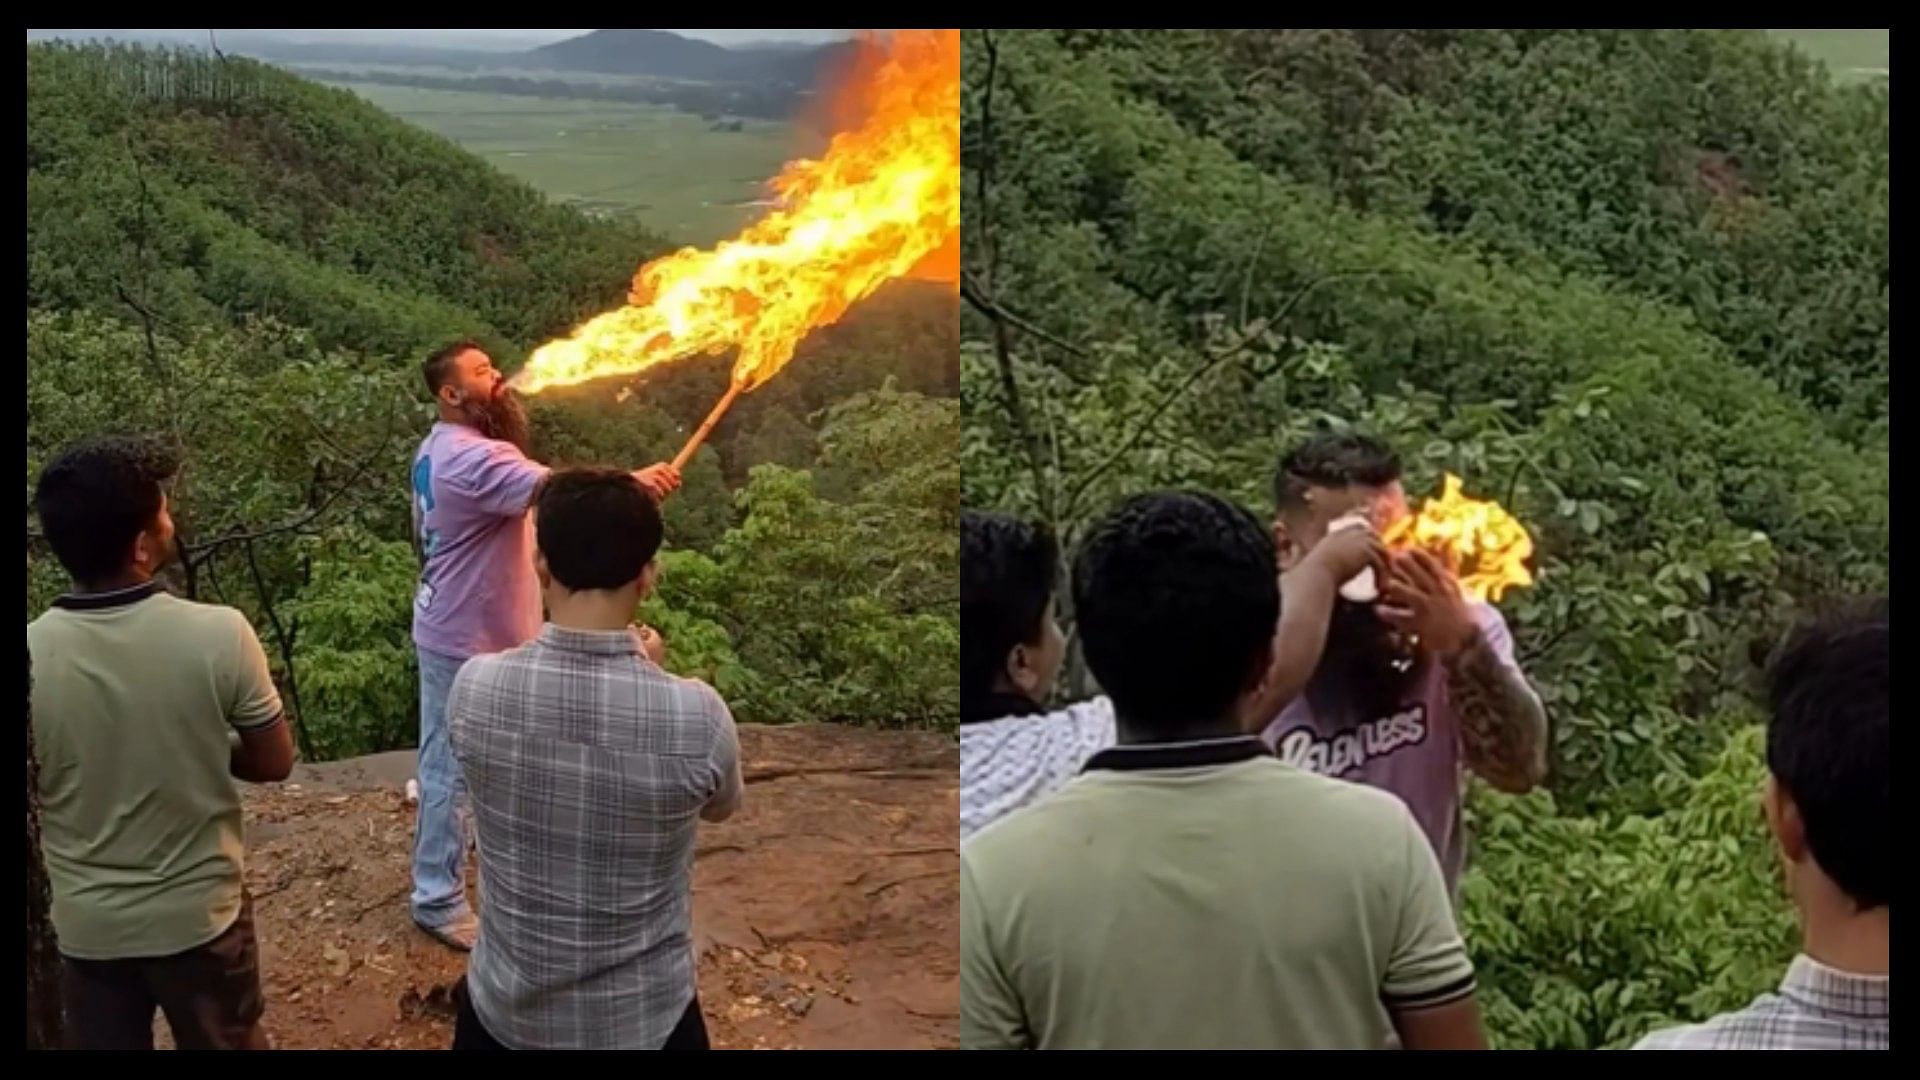 Man beard catches fire while performing dangerous stunt shocking video viral on social media